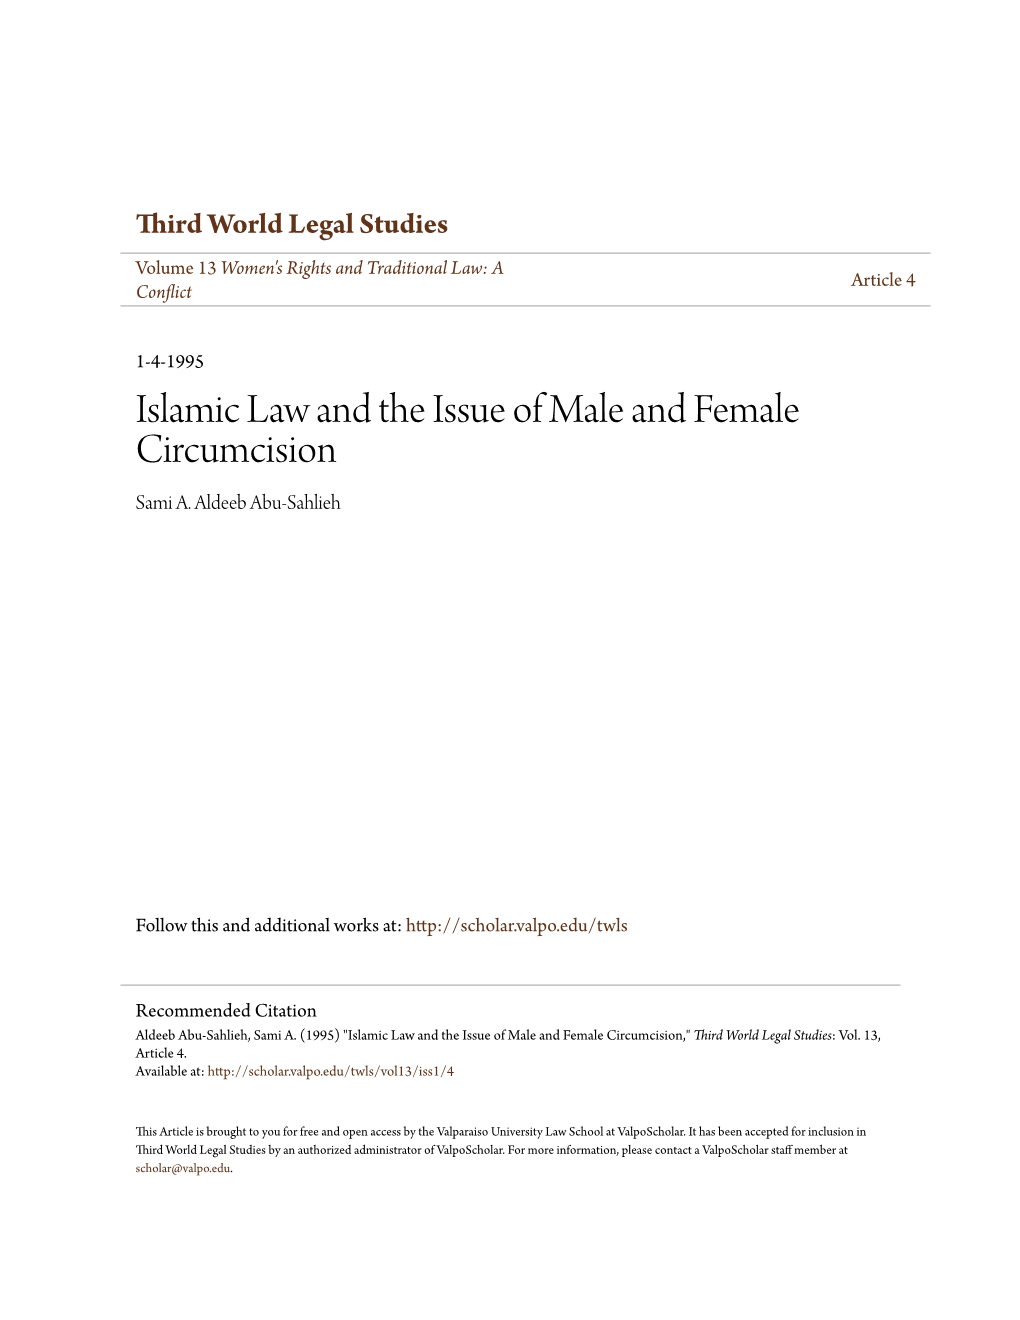 Islamic Law and the Issue of Male and Female Circumcision Sami A